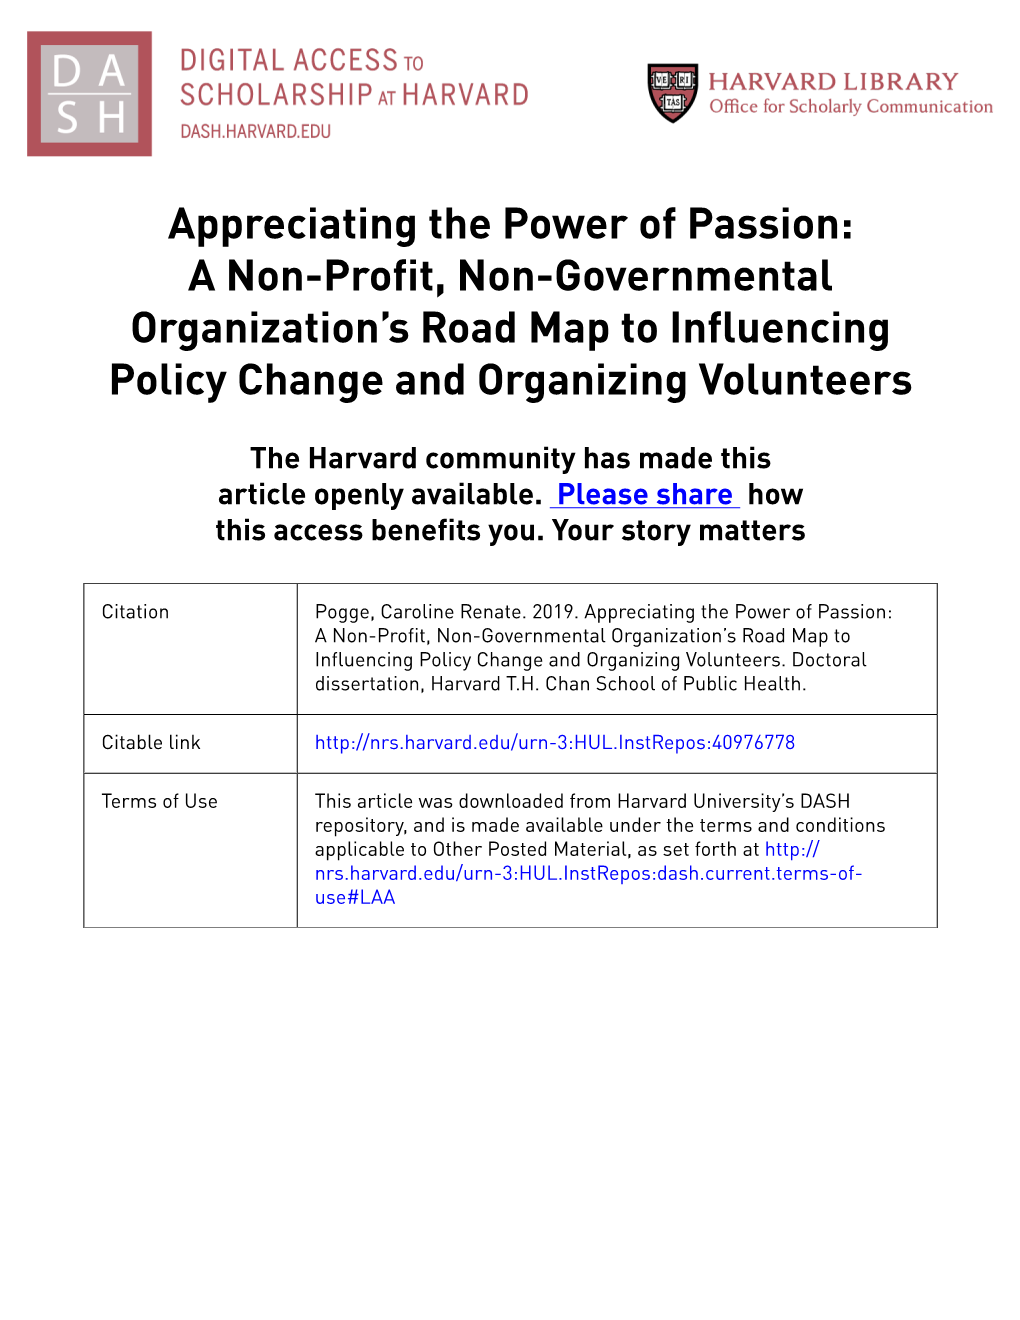 Appreciating the Power of Passion: a Non-Profit, Non-Governmental Organization’S Road Map to Influencing Policy Change and Organizing Volunteers